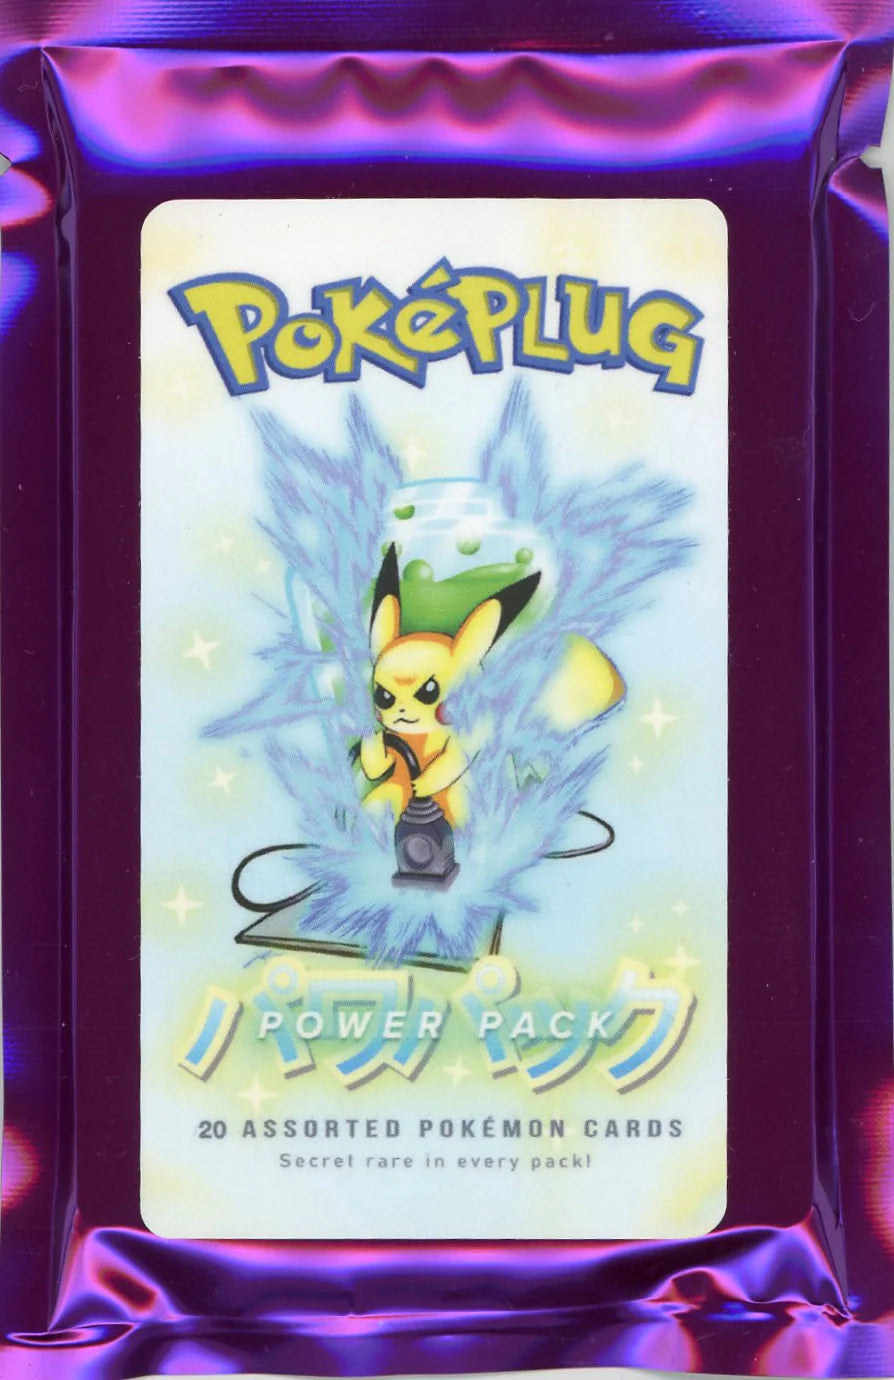 PokéPlug POWER PACK - PURPLE Japanese Edition - 20 Cards - Secret Rare in Every Pack!